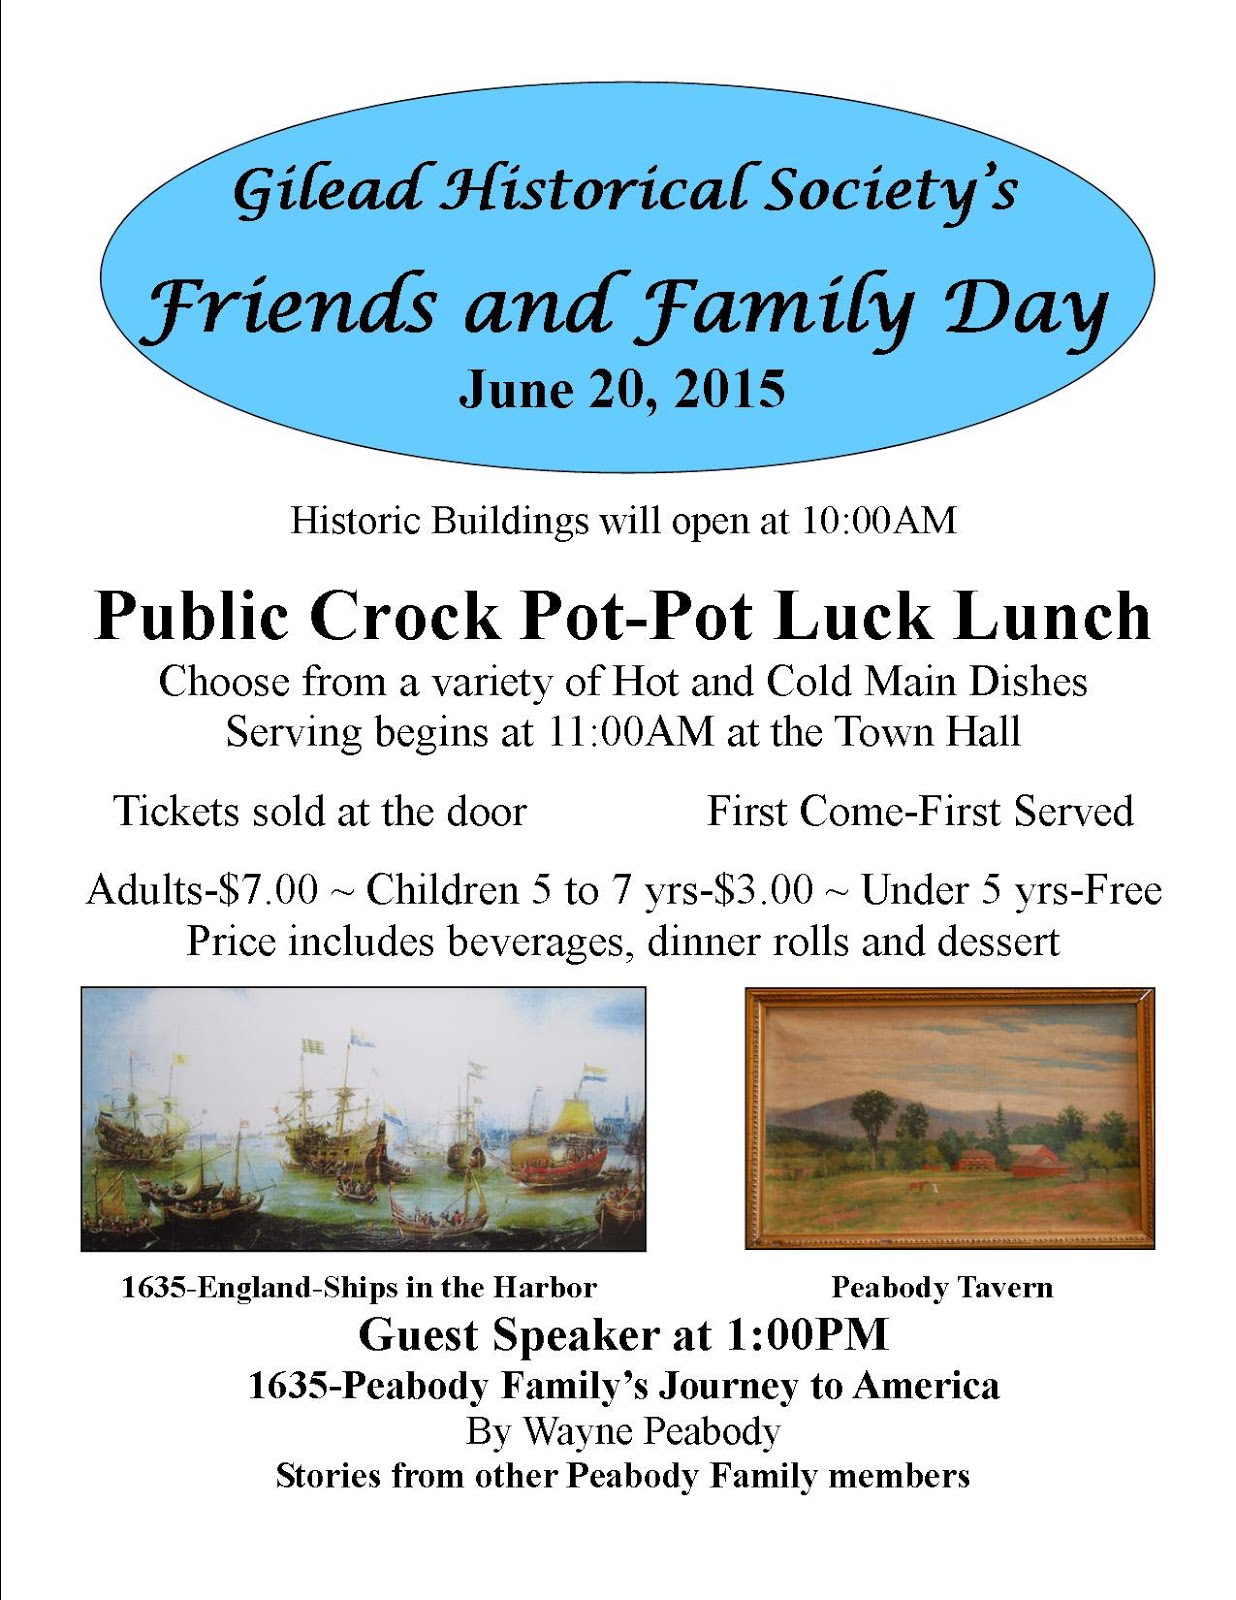 2015 Friends and Family Day